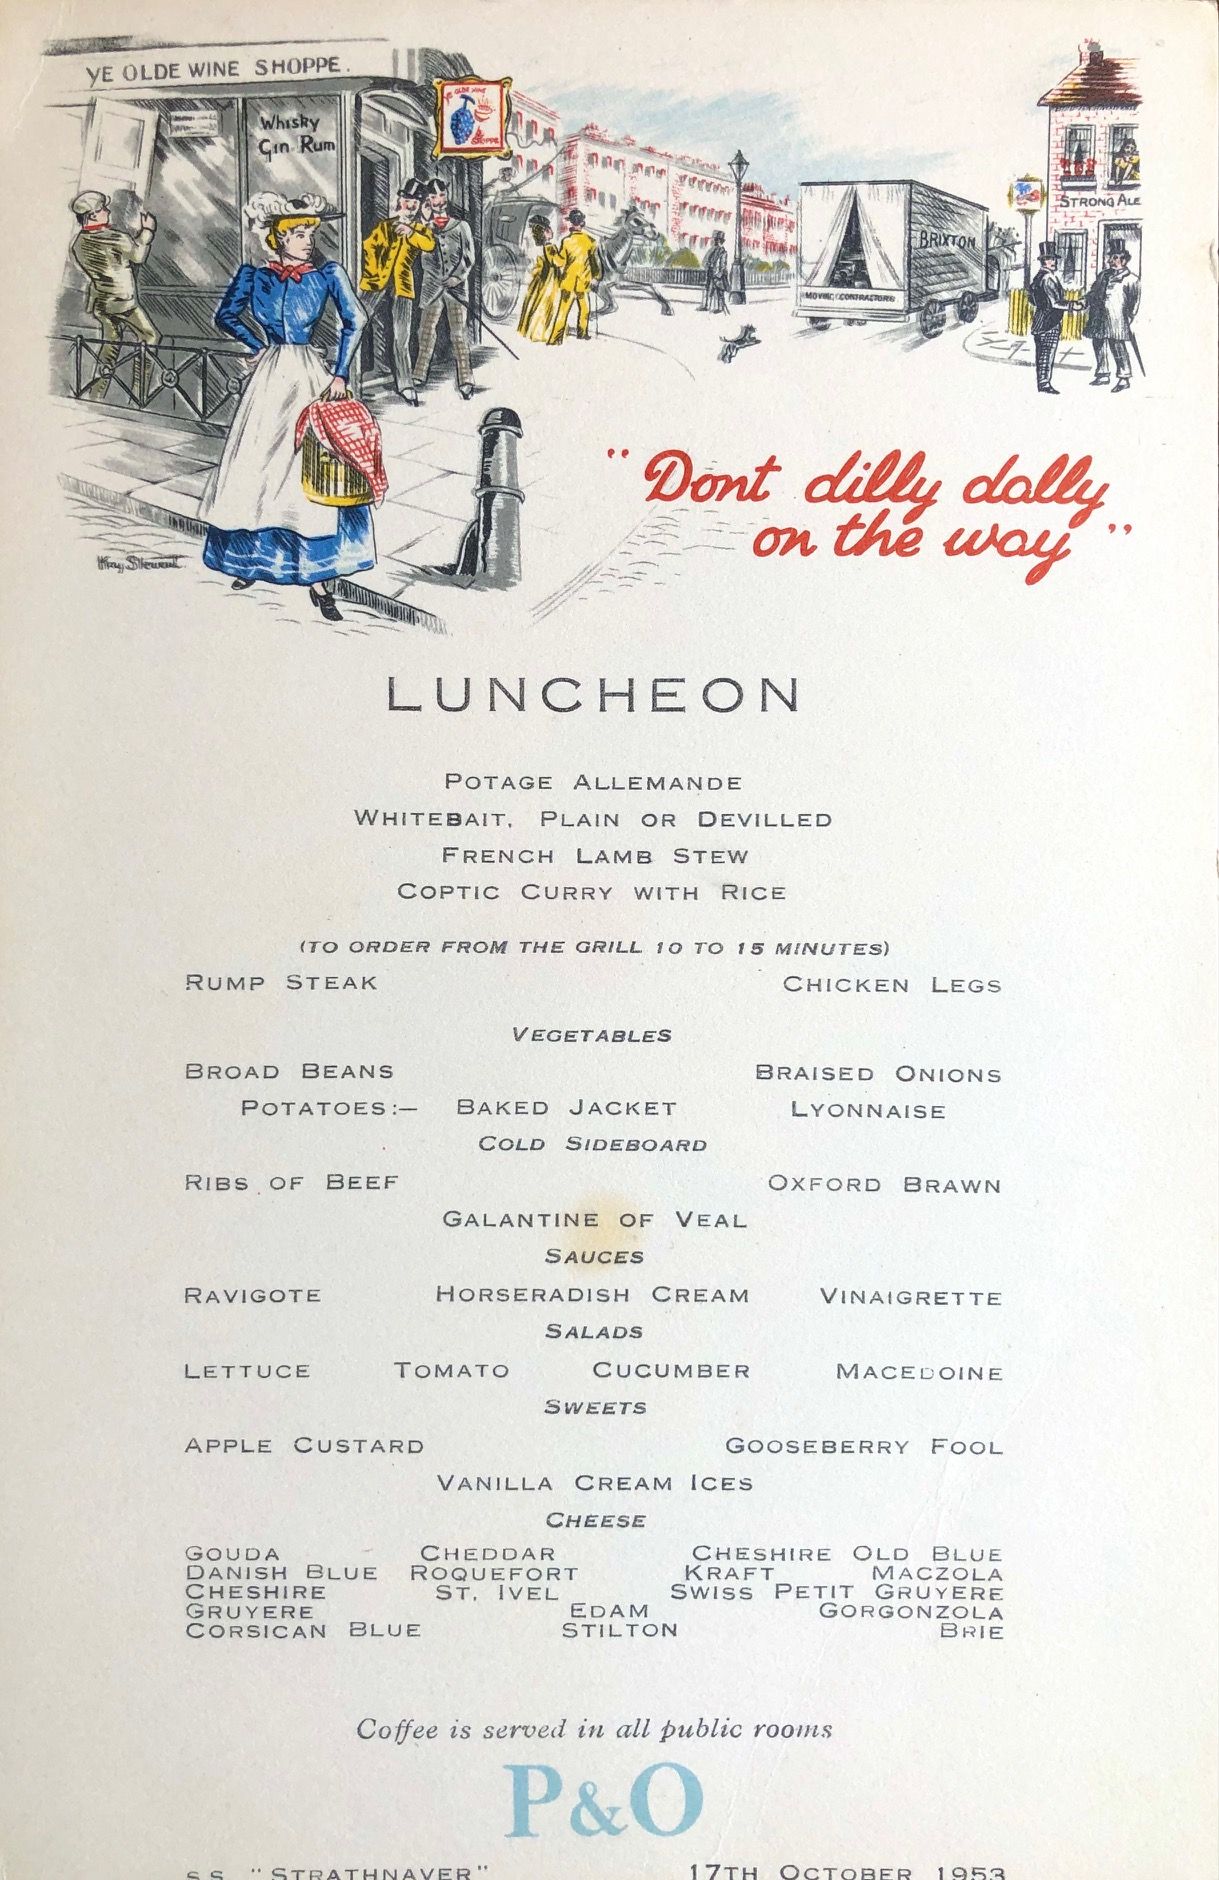 *NEW* P & O Lines. S.S. "Strathnaver" Luncheon Menu - Don't Dilly Dally on the Way